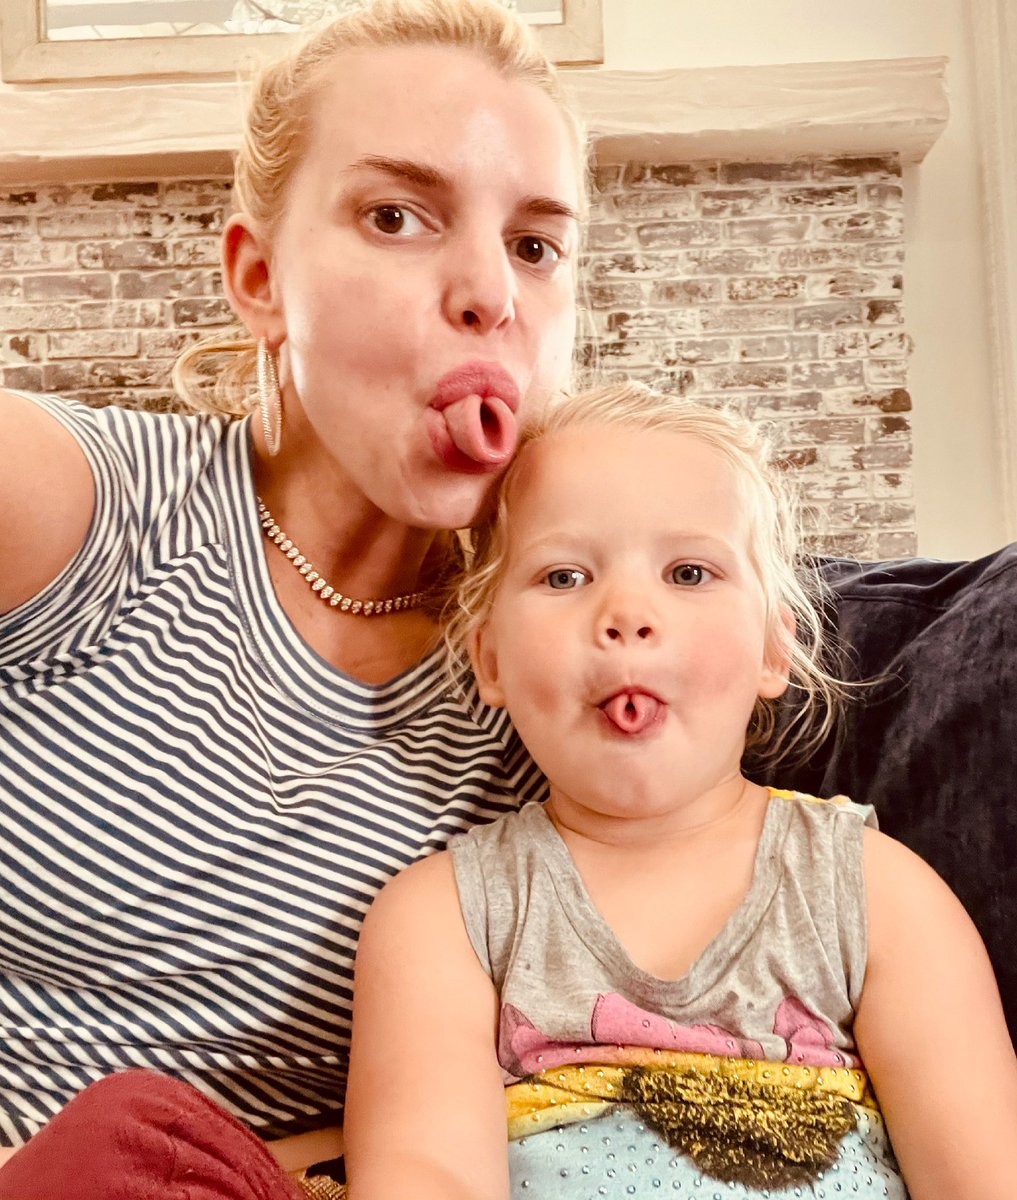 Taco tongues are our daily selfie thang. Tabasco anyone? 😜🌮👅🤣 